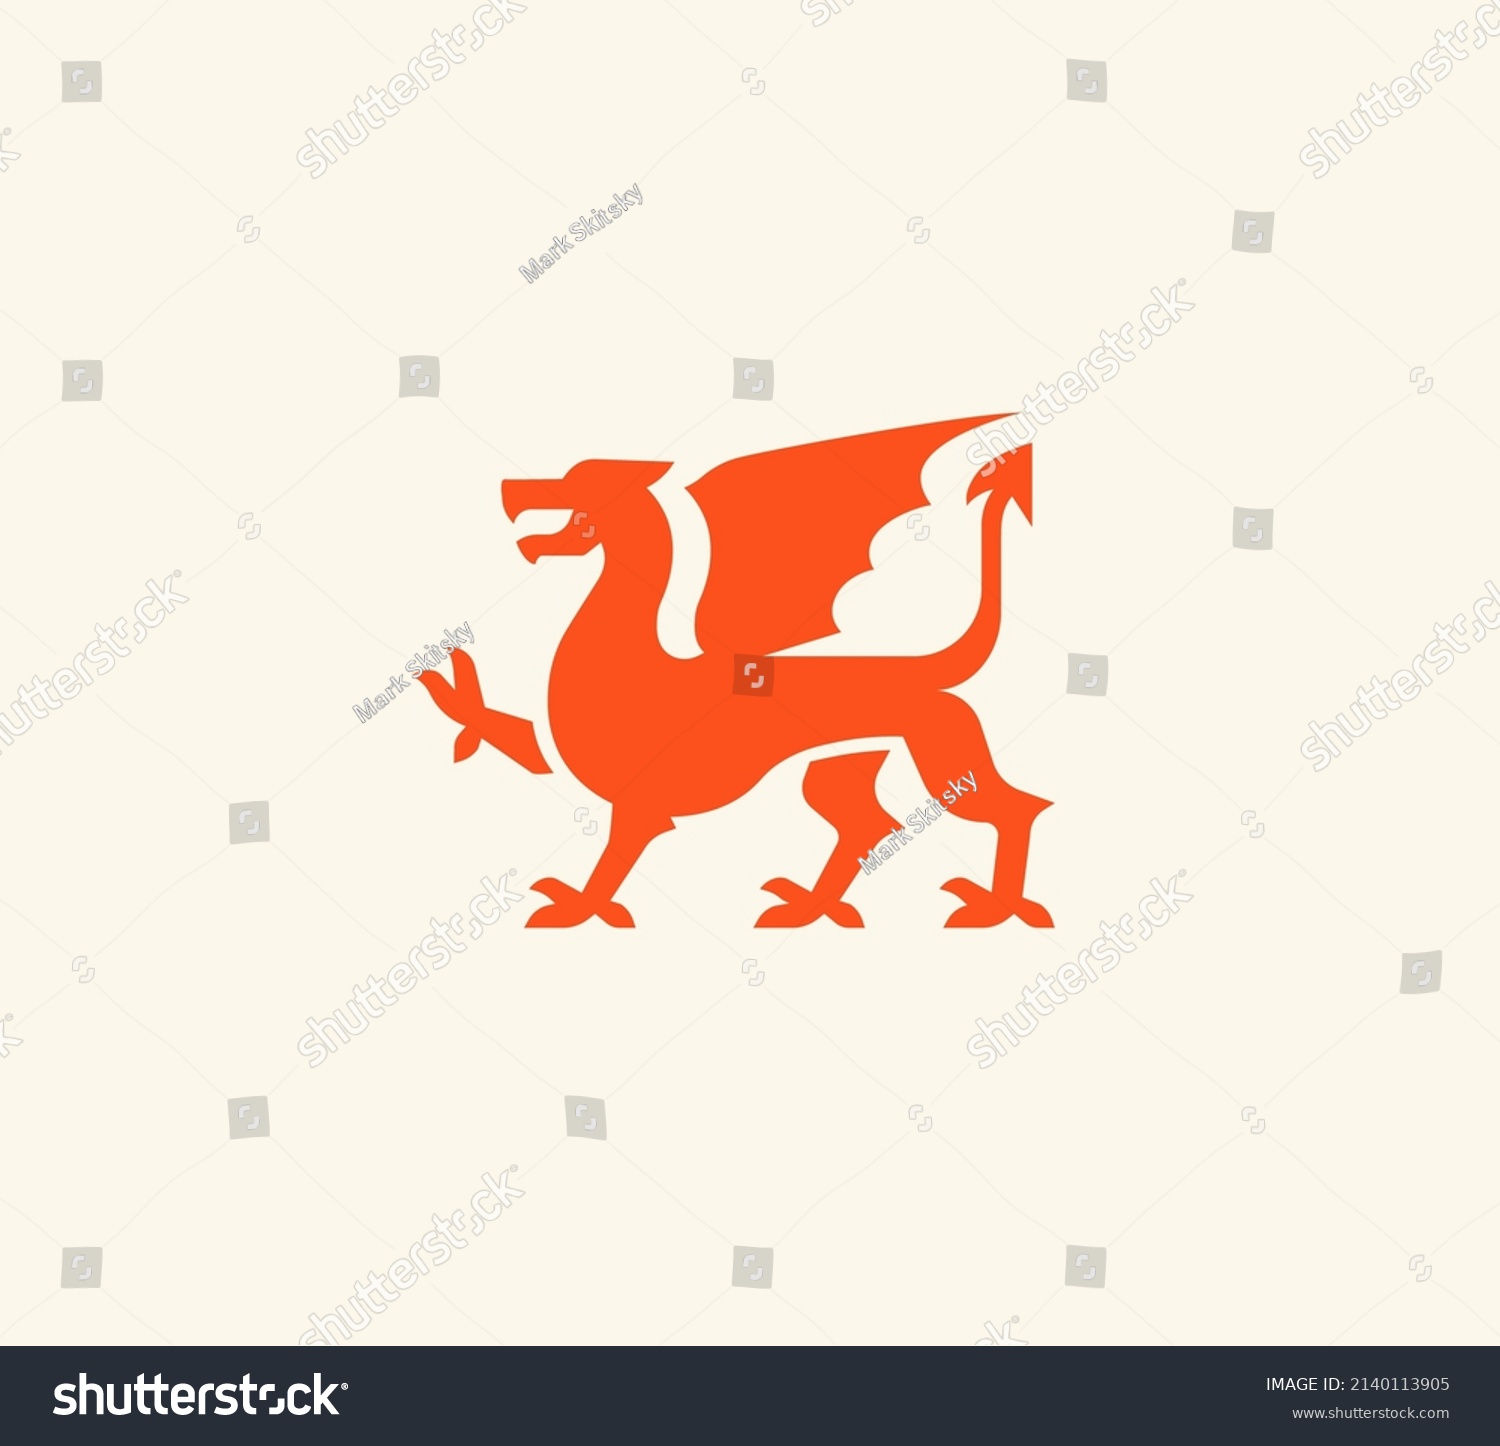 Medieval red dragon logo. Dragon with wings red silhouette. Vector illustration #2140113905